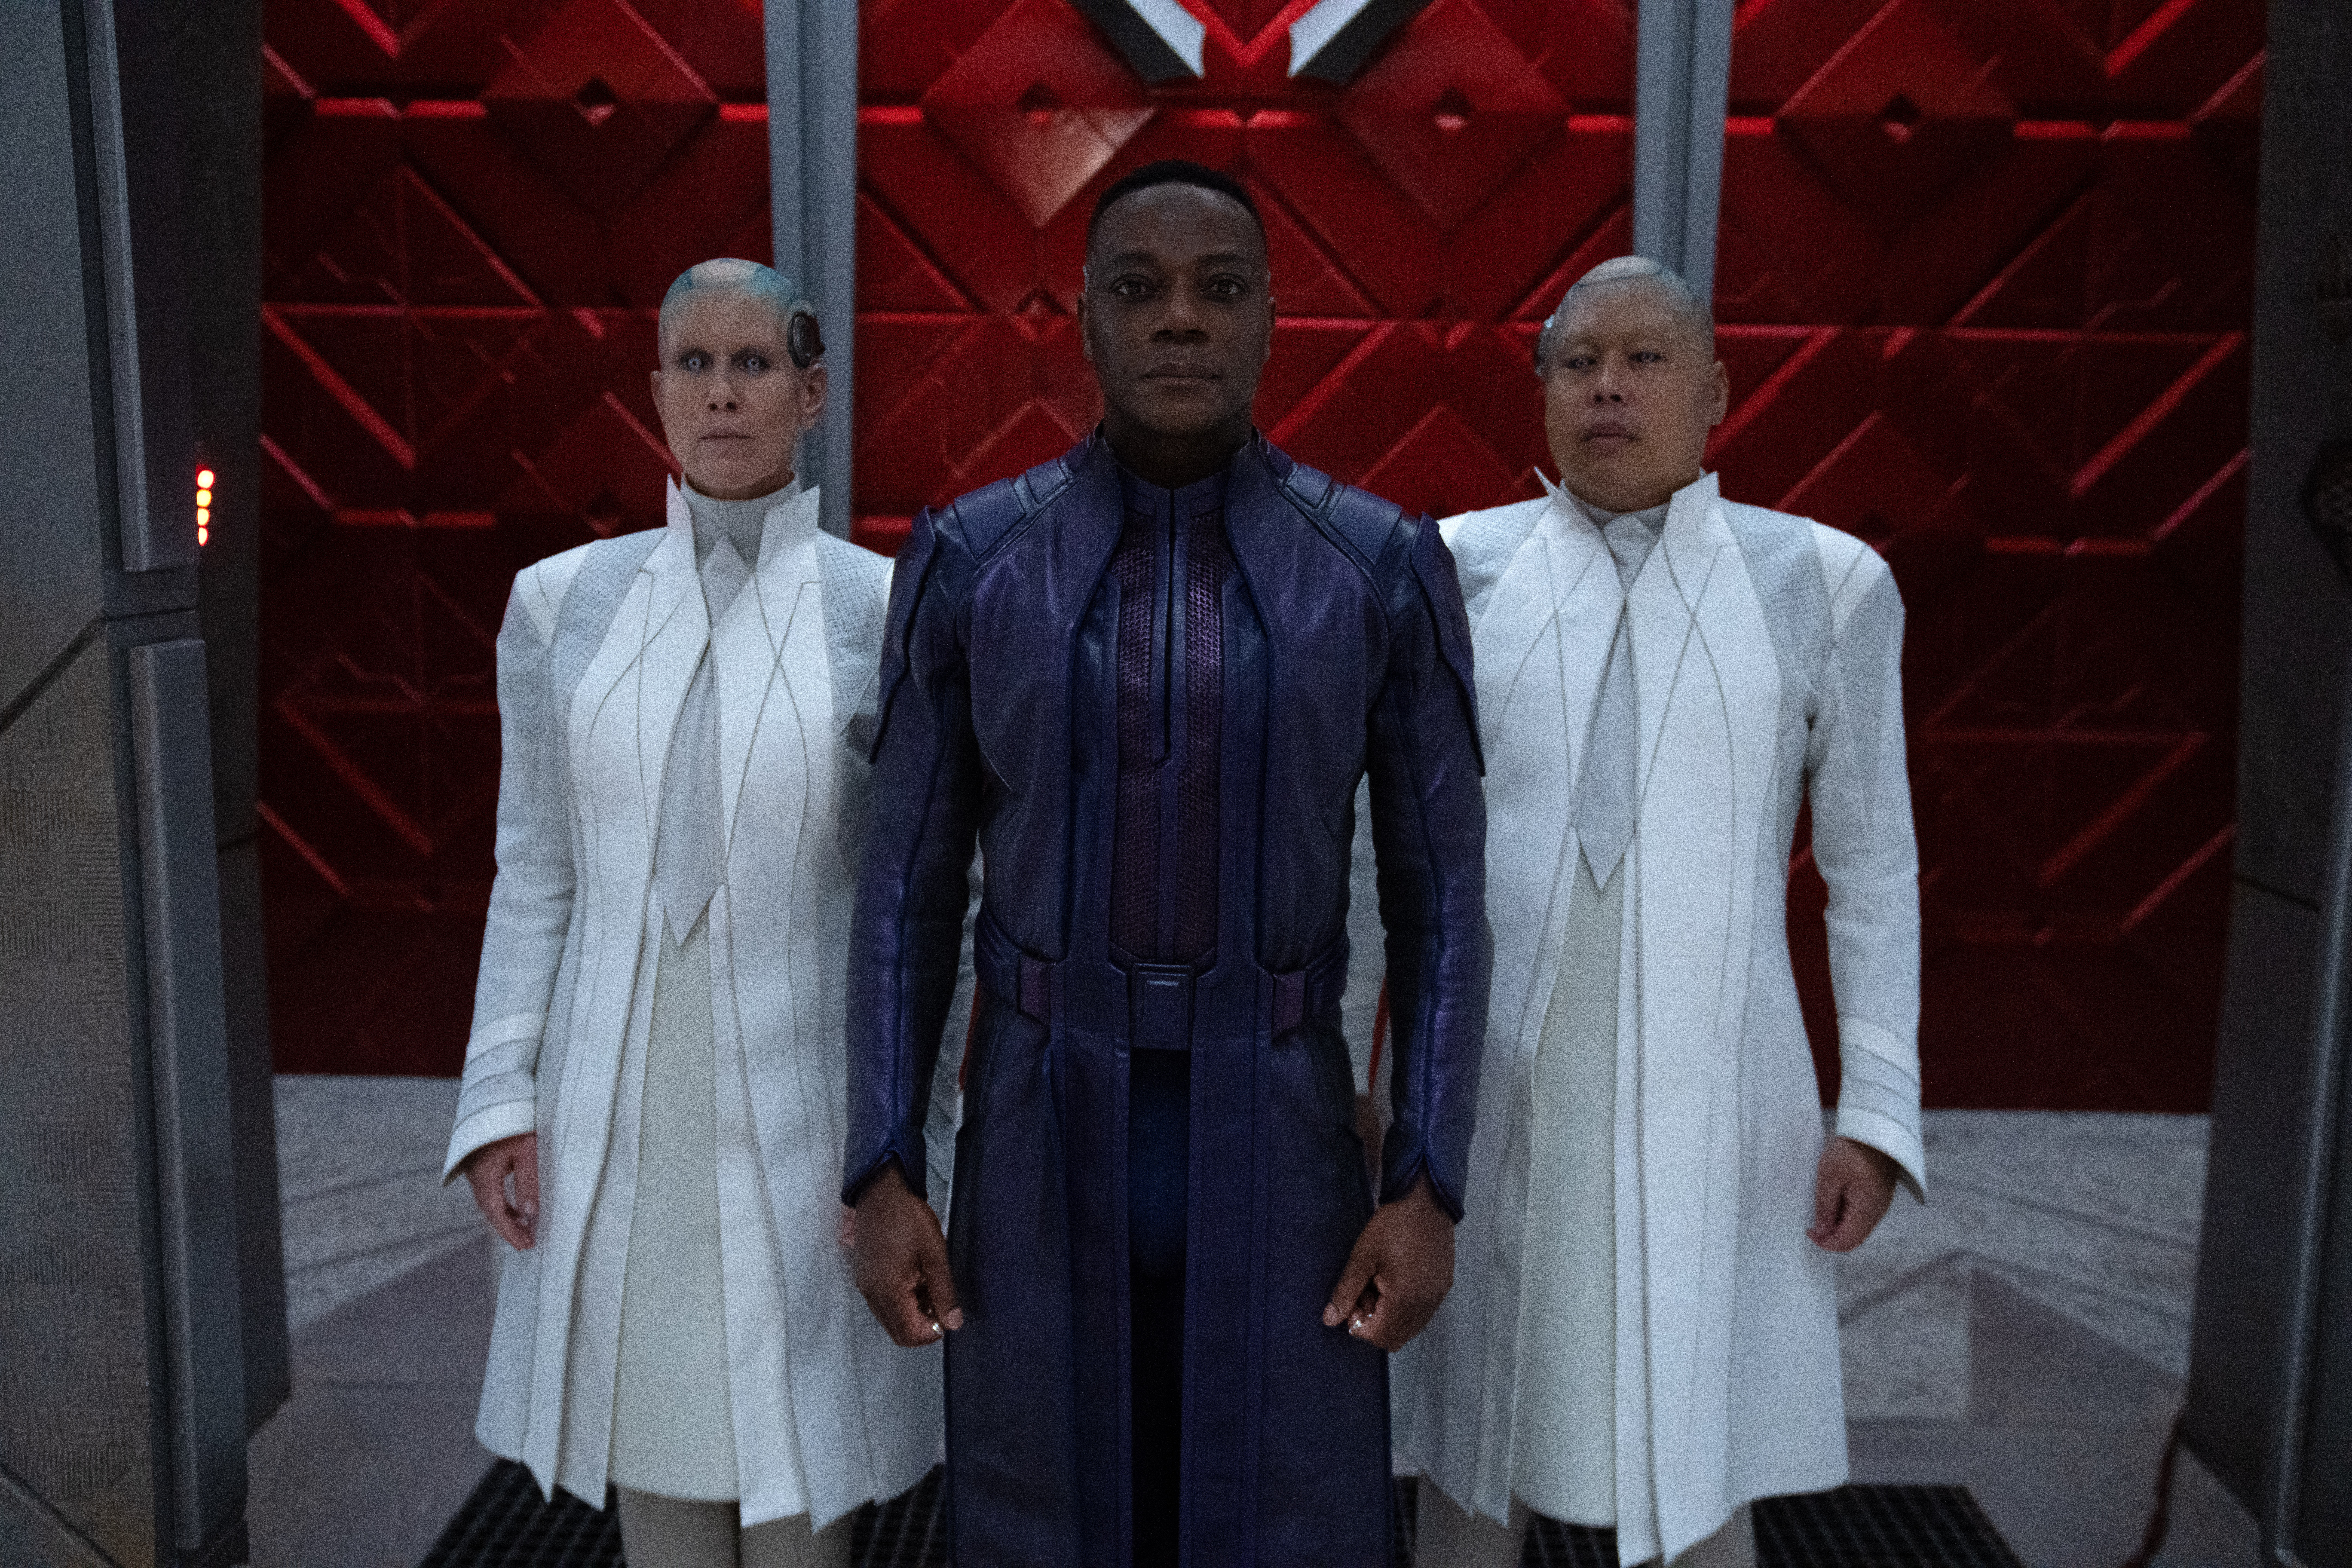 The High Evolutionary stands between two of his scientists in Guardians of the Galaxy Vol. 3